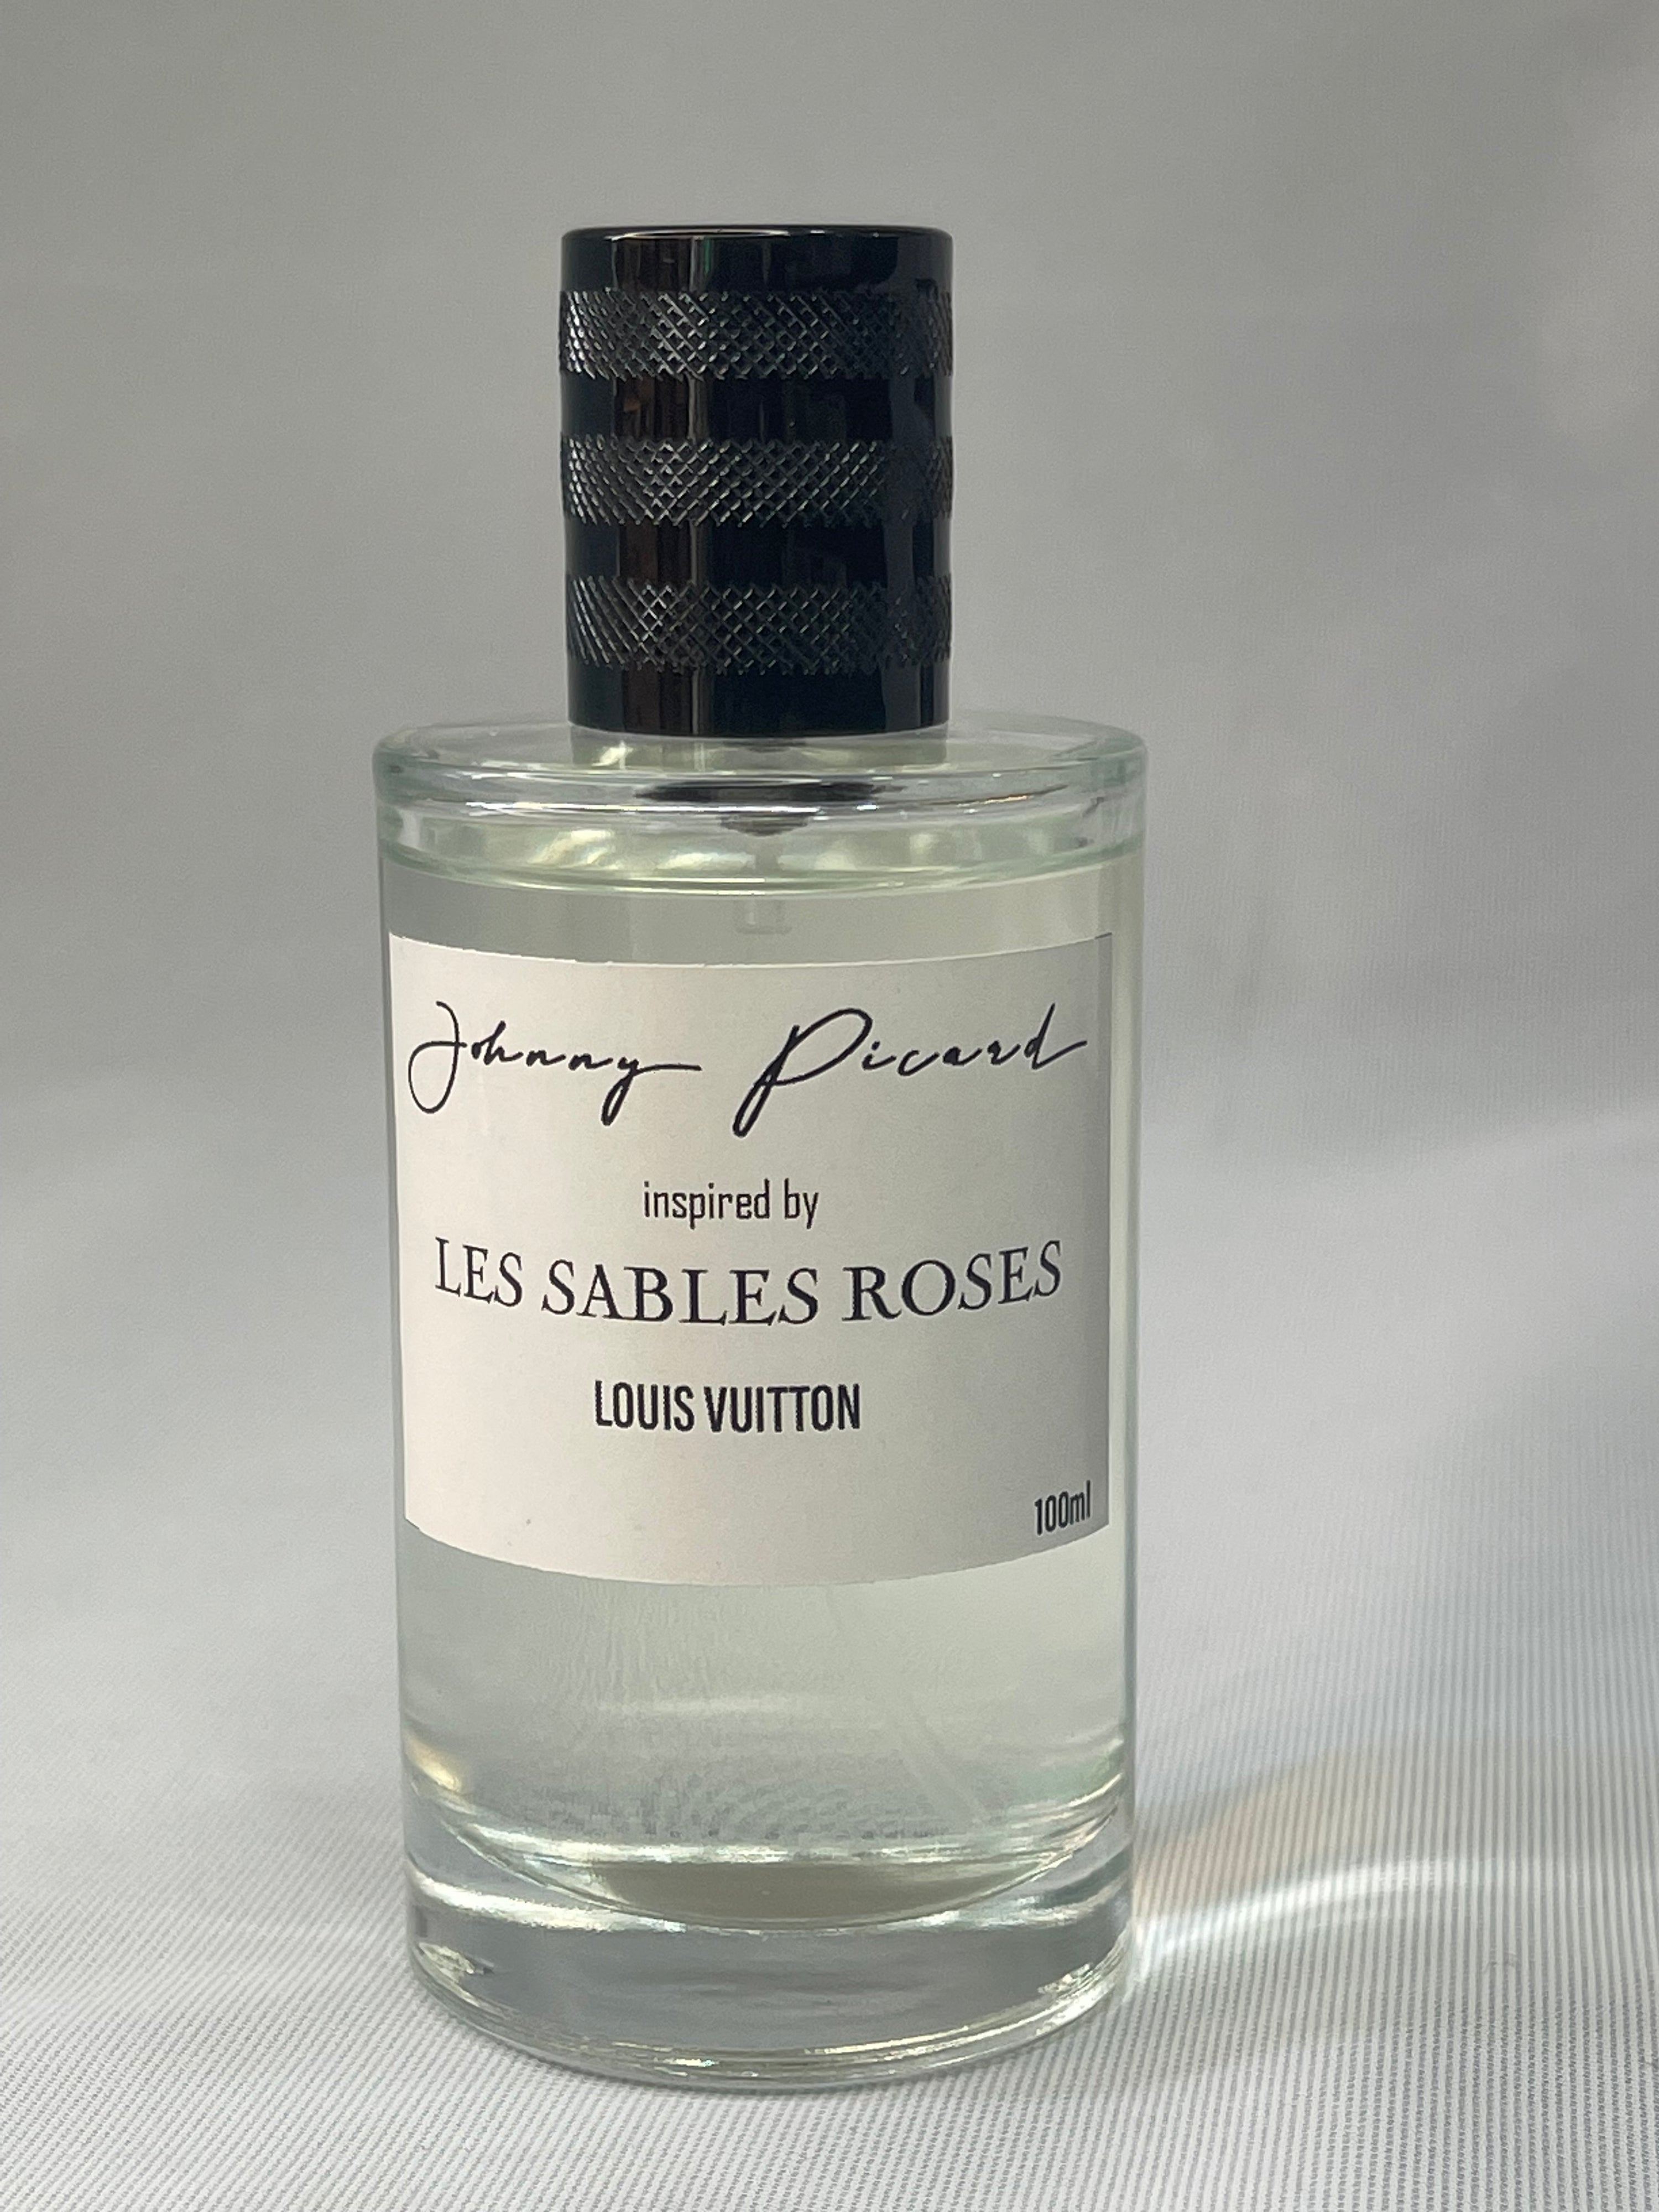 Johnny picard inspired by les sables roses LOUIS VUITTON